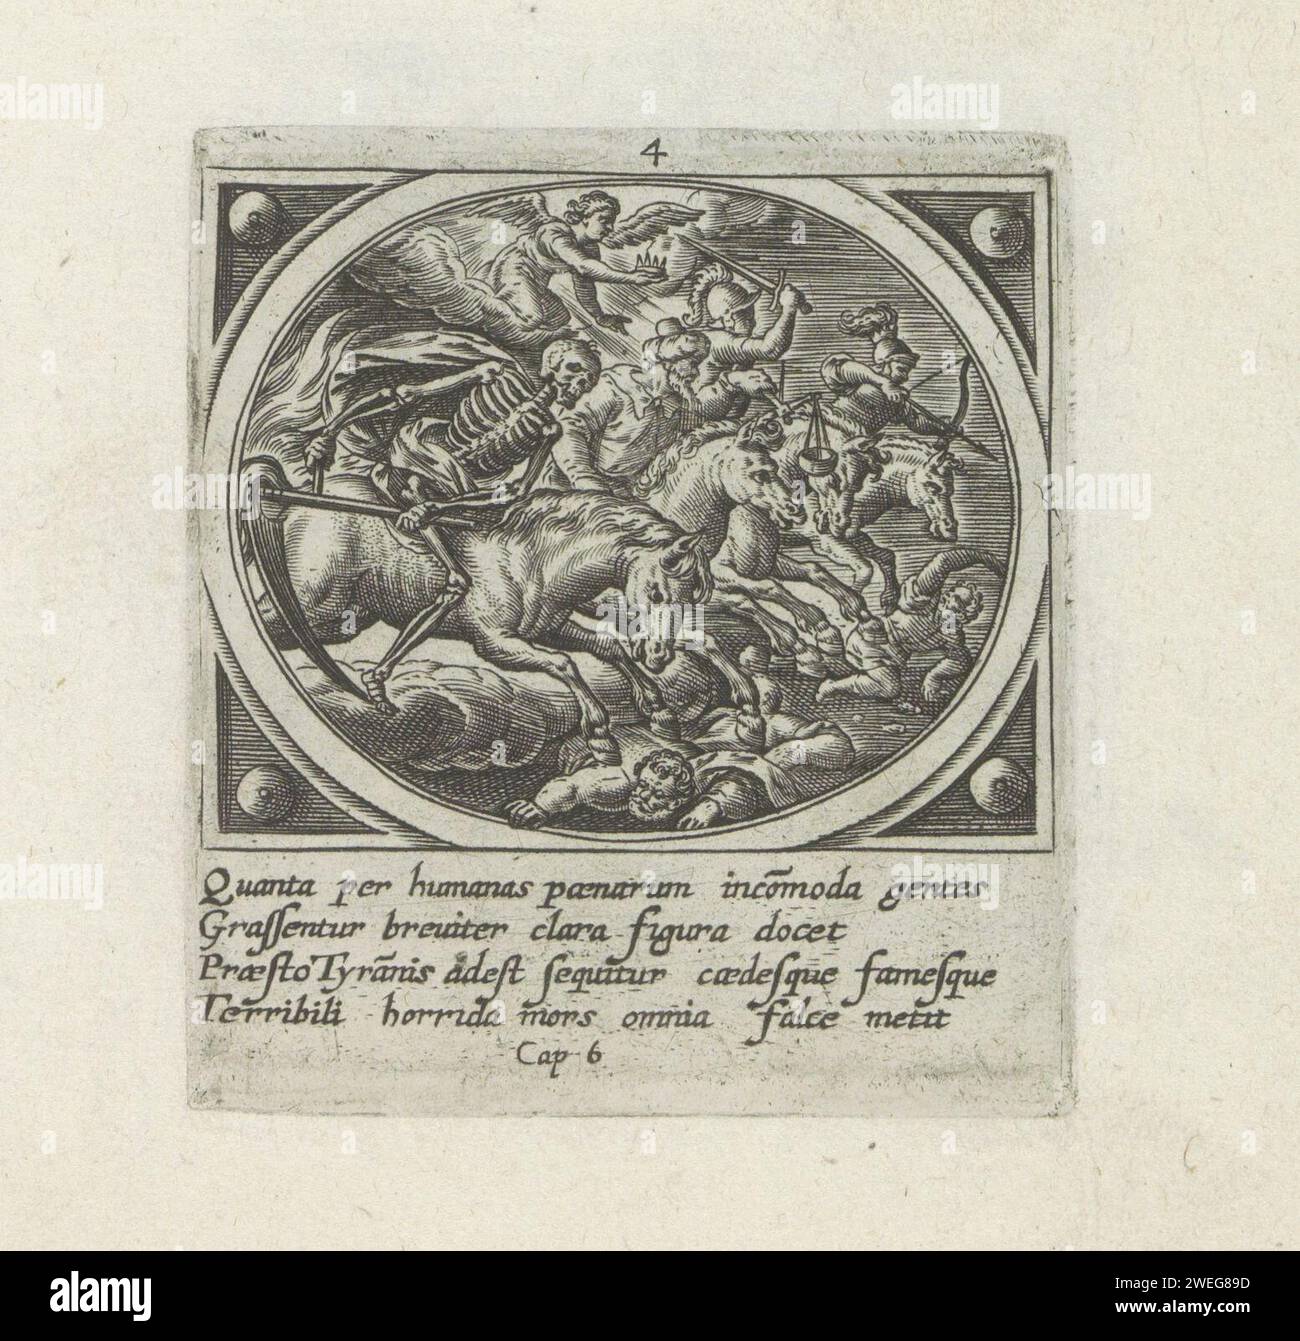 The four Apocalyptic riders, 1585 print Opening the first four stamps: the four Apocalyptic riders, 'Victorie', 'War', 'Hunger' and 'Death' trample humanity. Above them an angel, with a crown. Under the show a reference in Latin to the Bible text in op. 6. This print is part of an album.  paper engraving the four horsemen of the Apocalypse Stock Photo